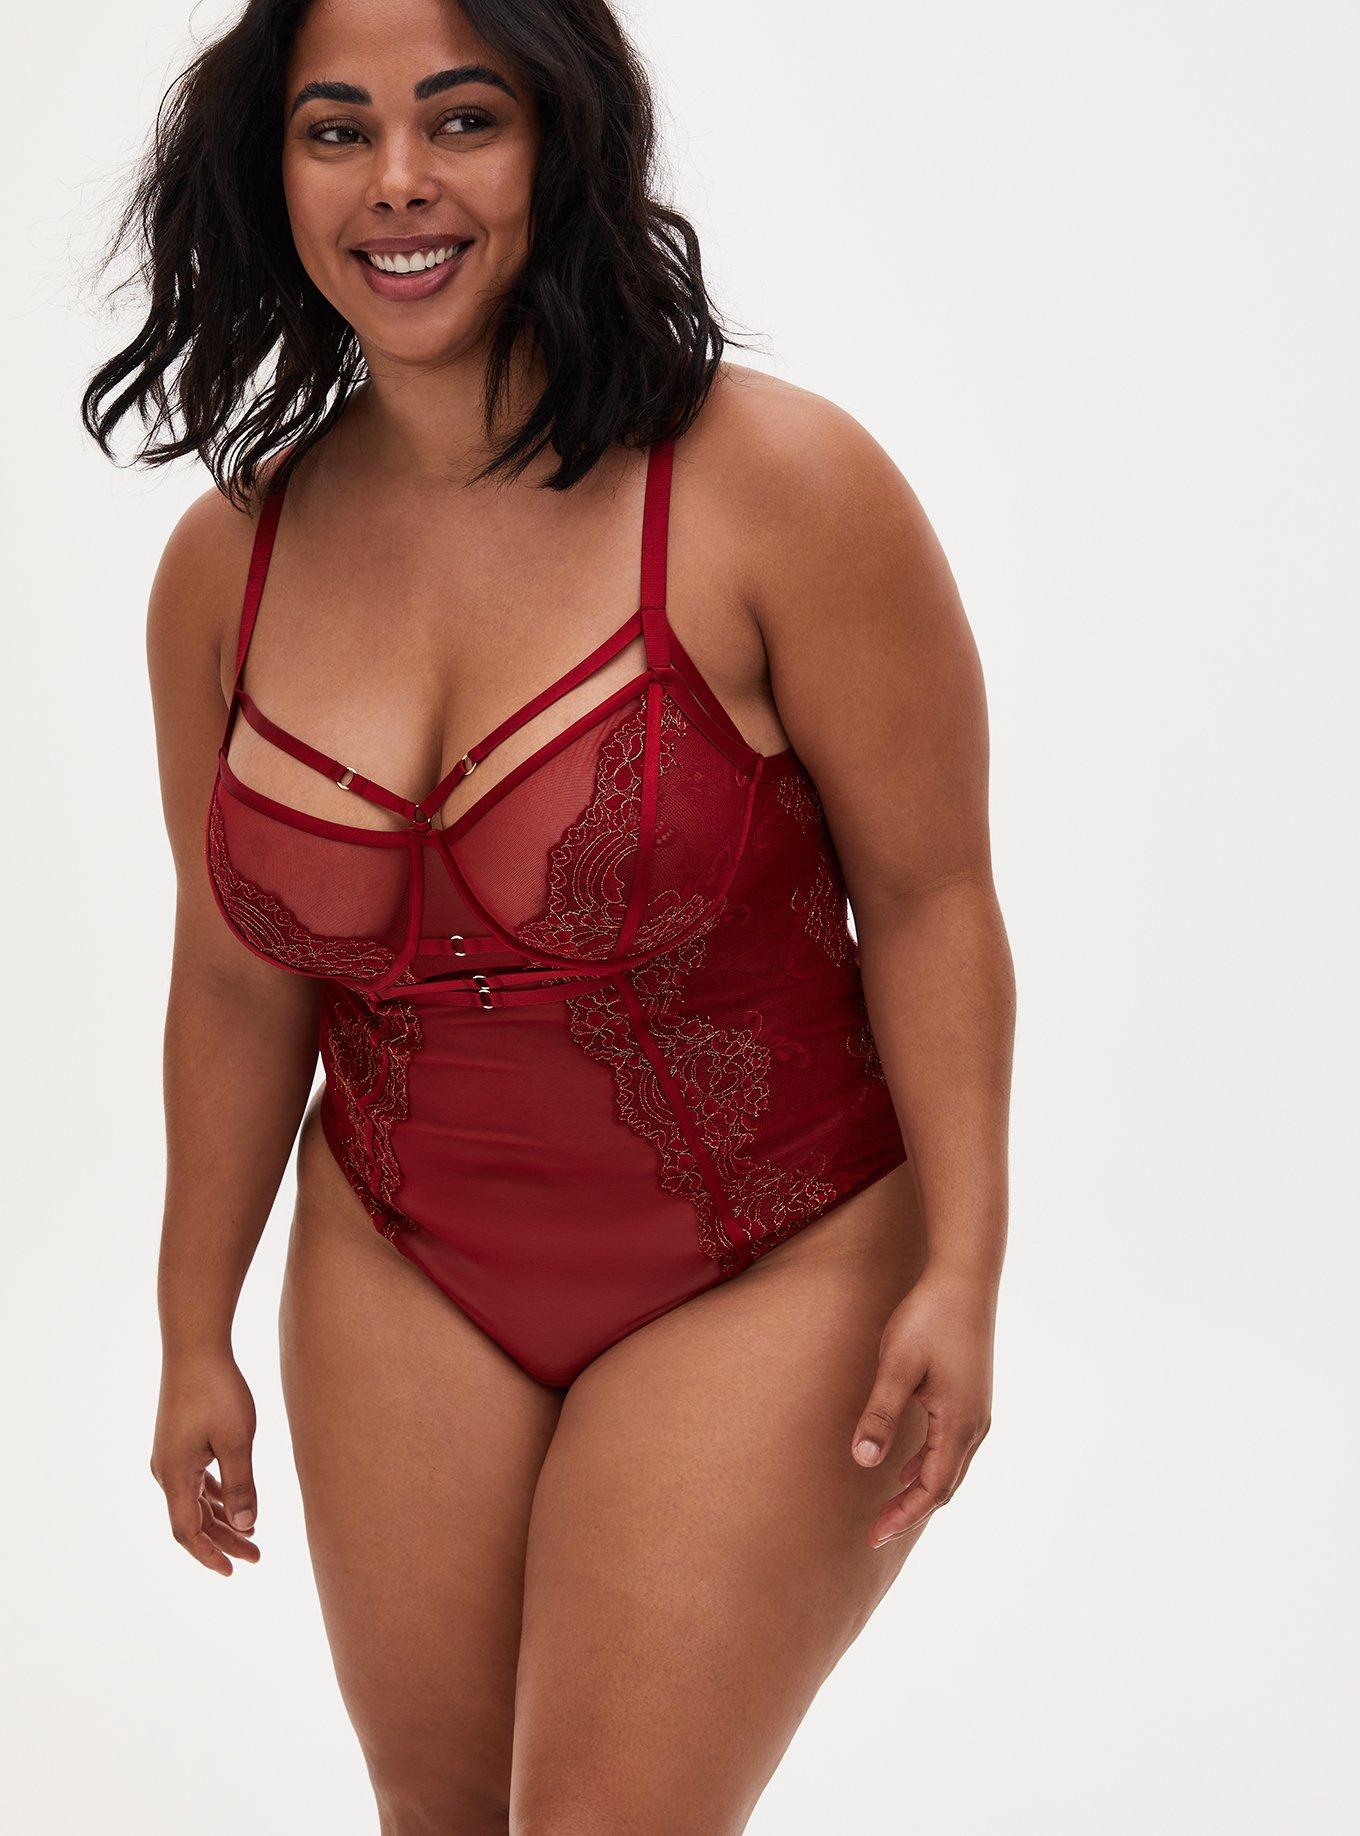 Plus Size - Red Mesh & Lace Harness Thong Bodysuit - Torrid